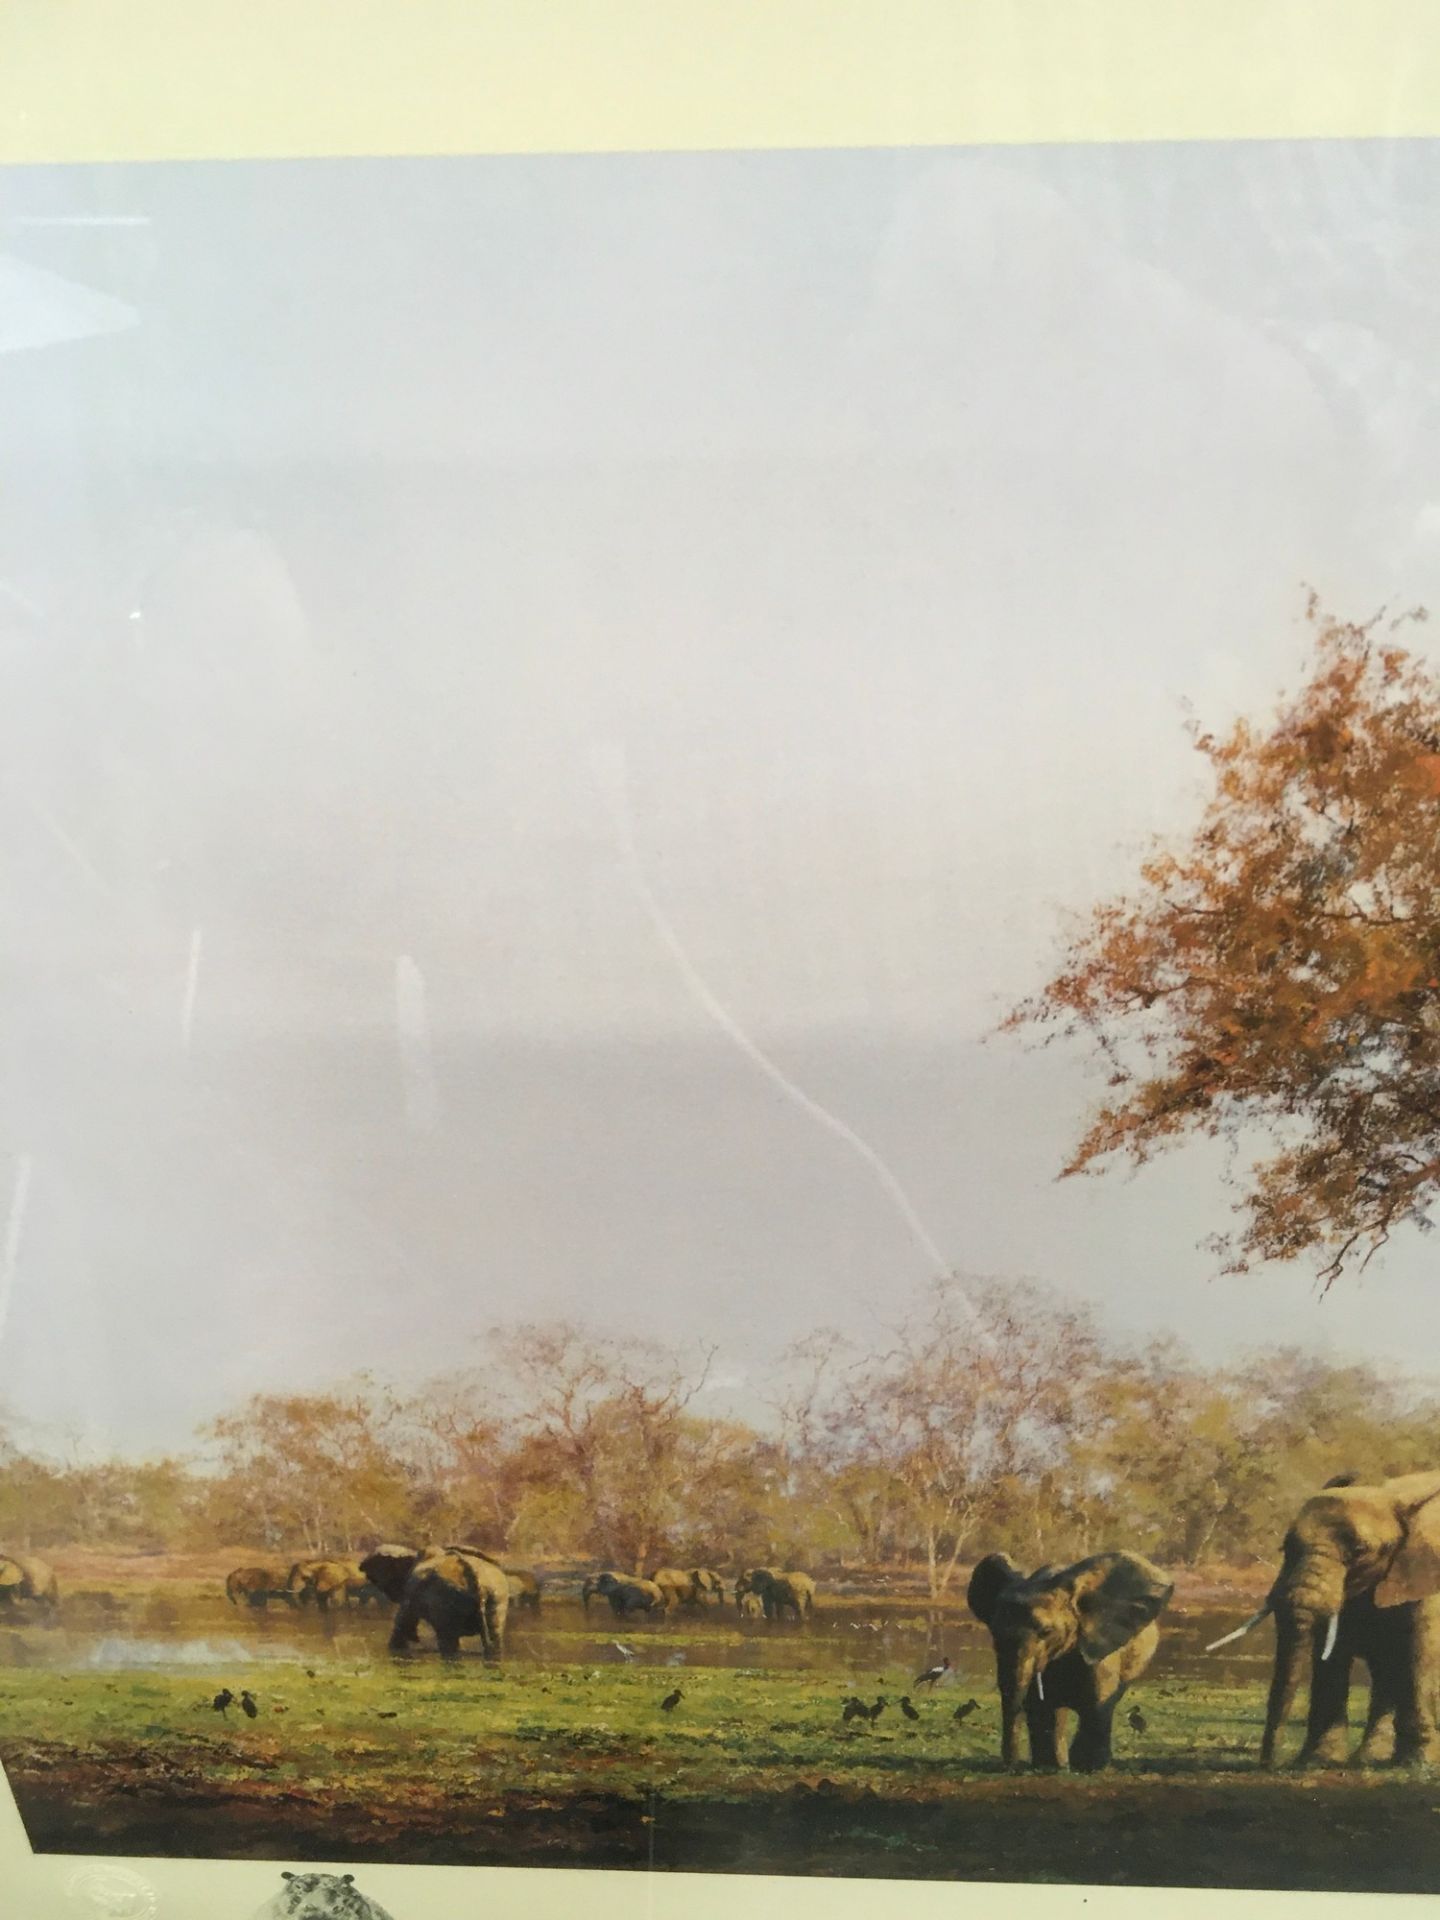 David Shepard ltd edition print "Luangwa Evening" signed to bottom no 1235/1500 with intented - Image 6 of 8